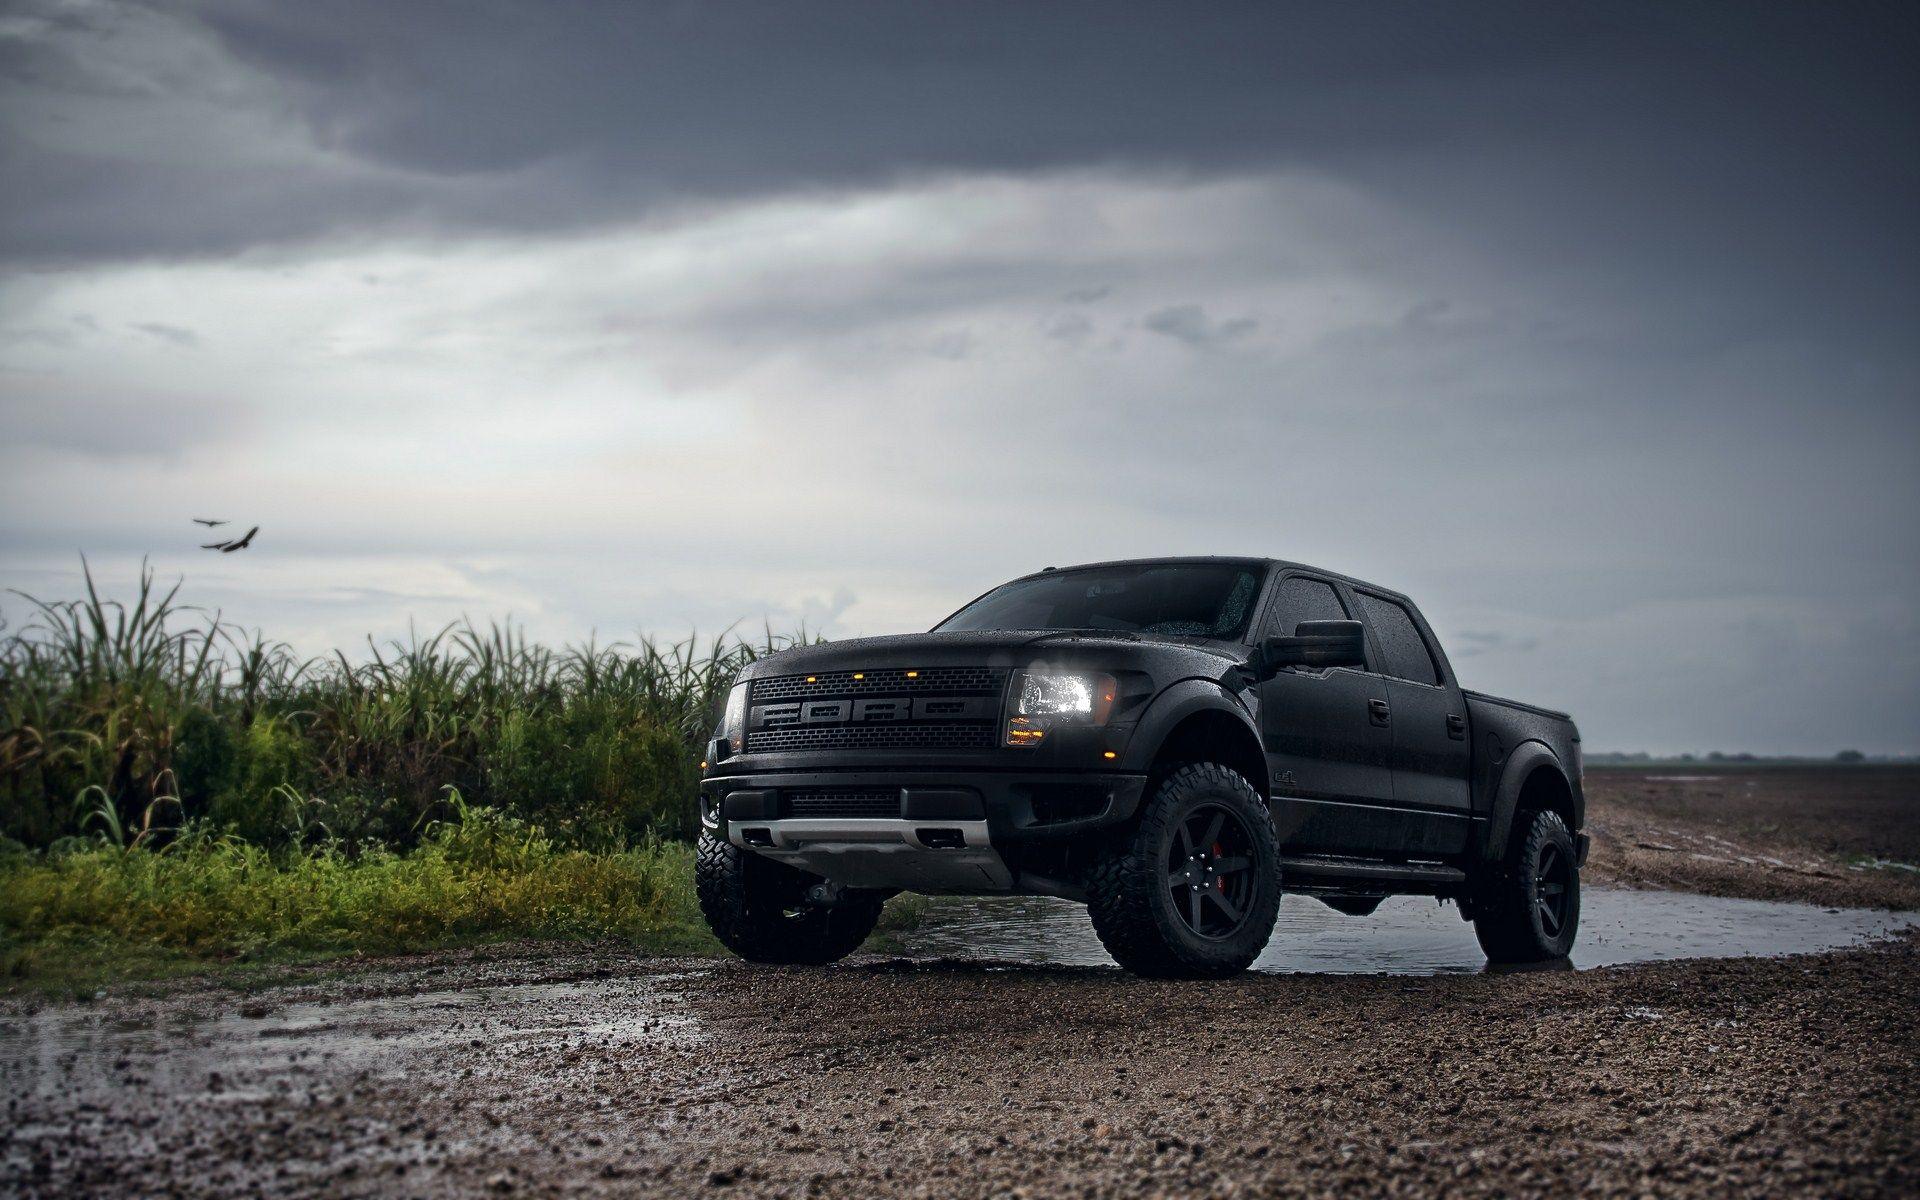 Ford Raptor Wallpapers Wallpaper Cave